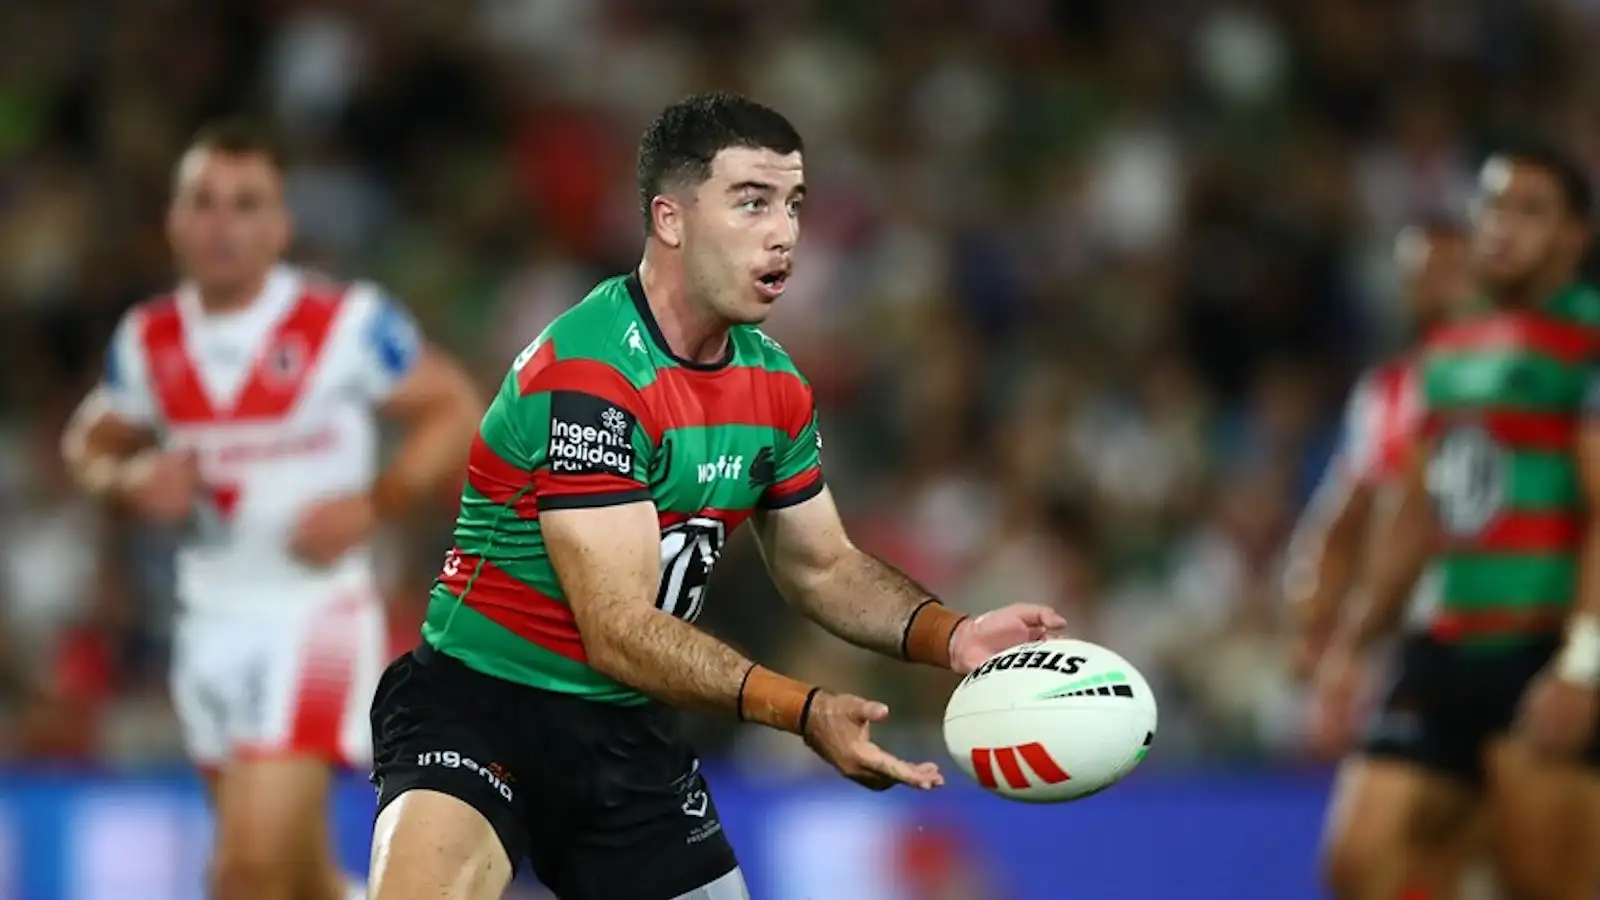 South Sydney Rabbitohs half-back linked with move to Super League